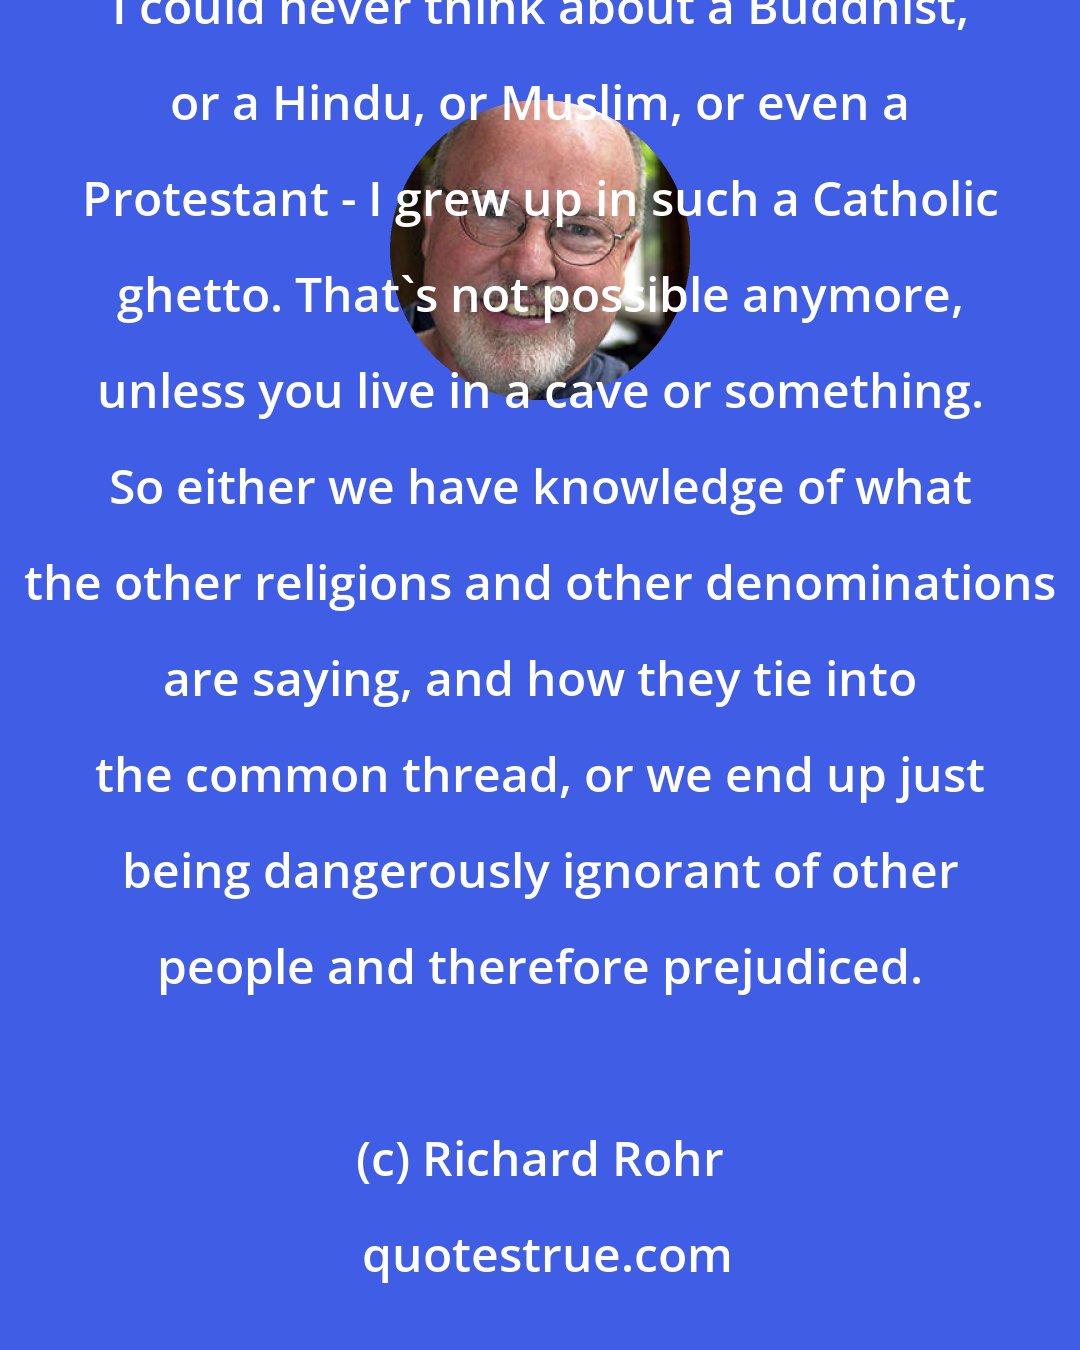 Richard Rohr: We cannot avoid the globalization of knowledge and information. When I was a boy growing up in Kansas, I could never think about a Buddhist, or a Hindu, or Muslim, or even a Protestant - I grew up in such a Catholic ghetto. That's not possible anymore, unless you live in a cave or something. So either we have knowledge of what the other religions and other denominations are saying, and how they tie into the common thread, or we end up just being dangerously ignorant of other people and therefore prejudiced.